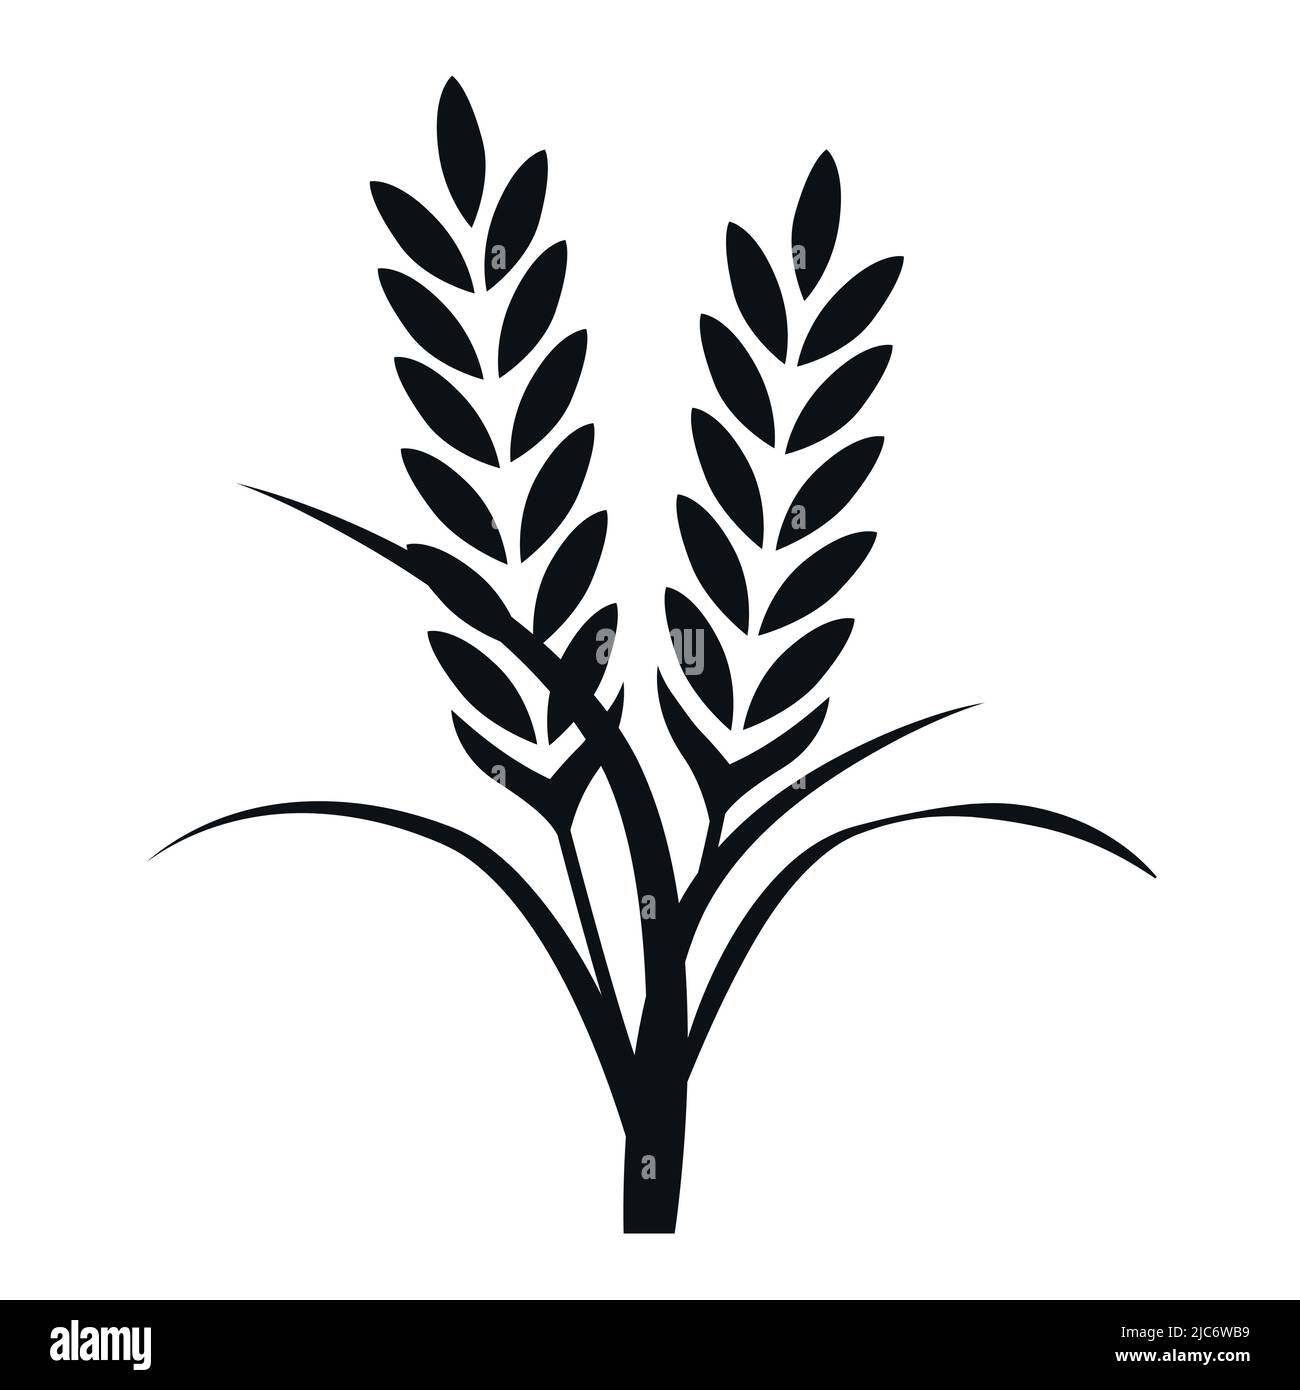 Rice and grain symbol for agriculture and plant farming vector illustration icon Stock Vector